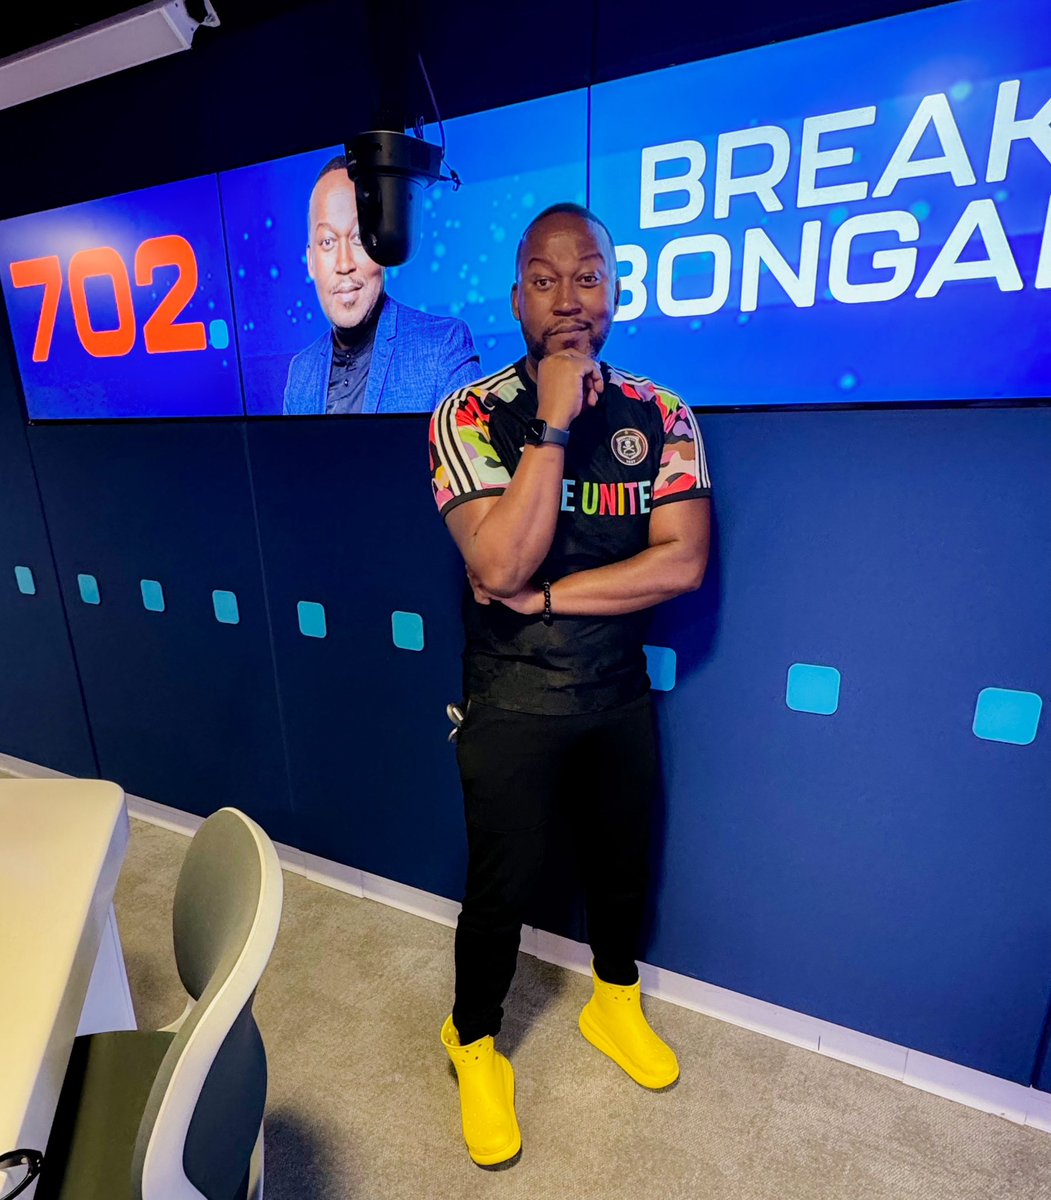 What does 30 years of democracy mean to ME? An openly queer man hosting a Breakfast talk show for a major English radio station? Wearing an Orlando Pirates jersey celebrating LGBTQ identity? My life as it exists would have been IMPOSSIBLE before 1994. #Freedom #Day #702Breakfast